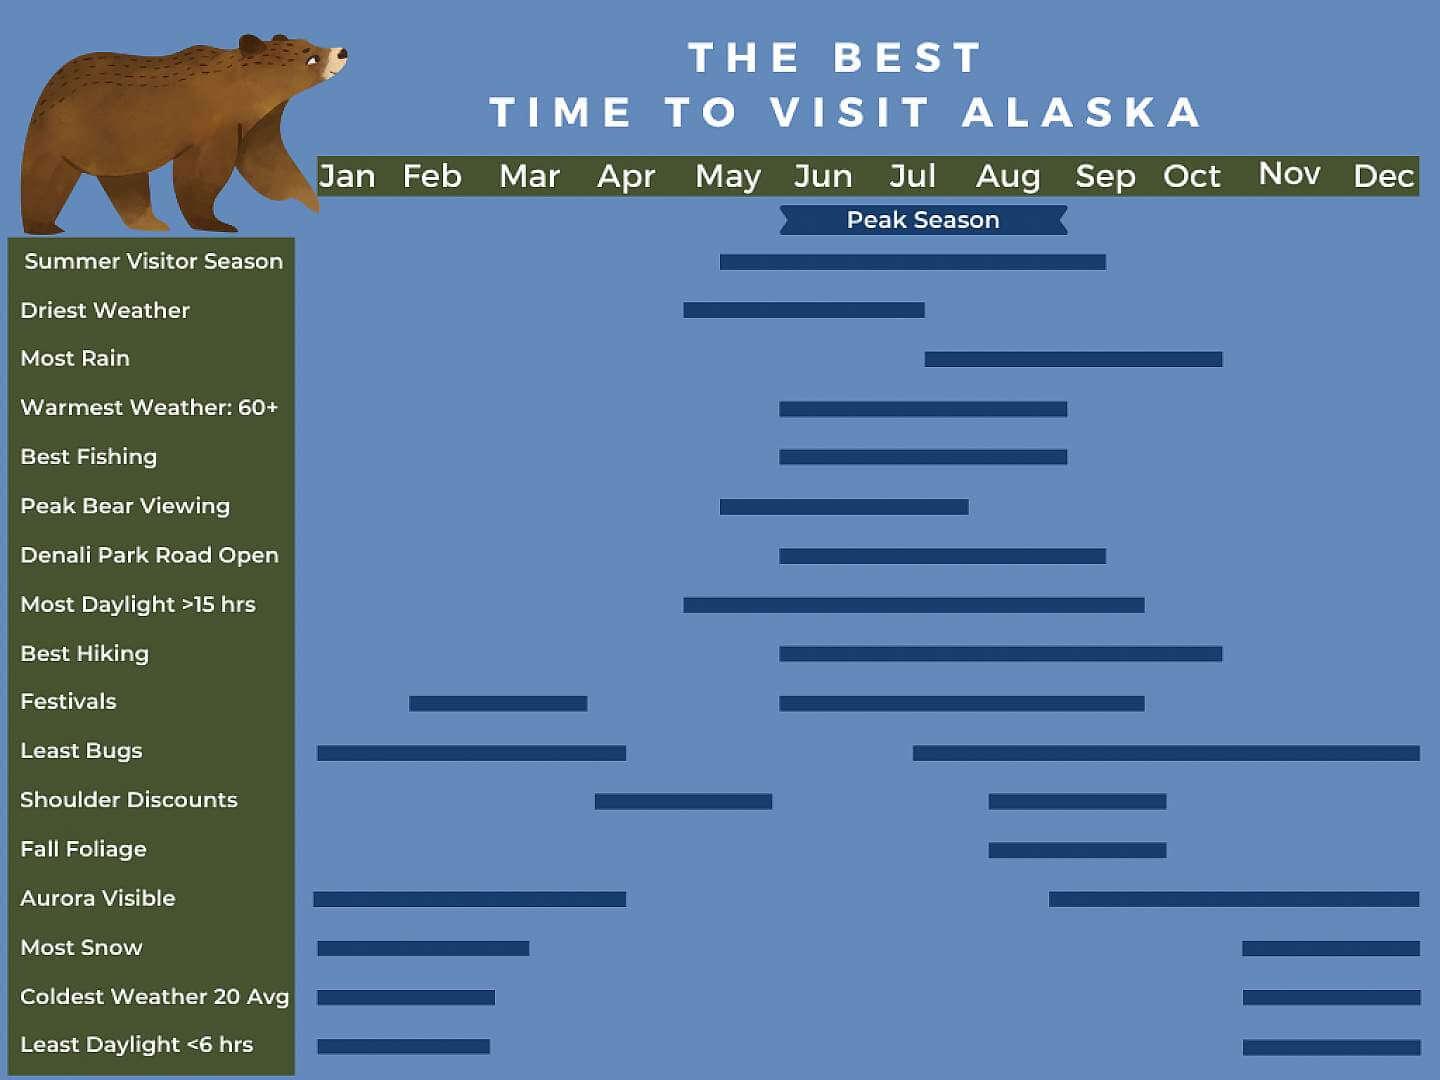 Chart showing the best time to visit Alaska for different activities